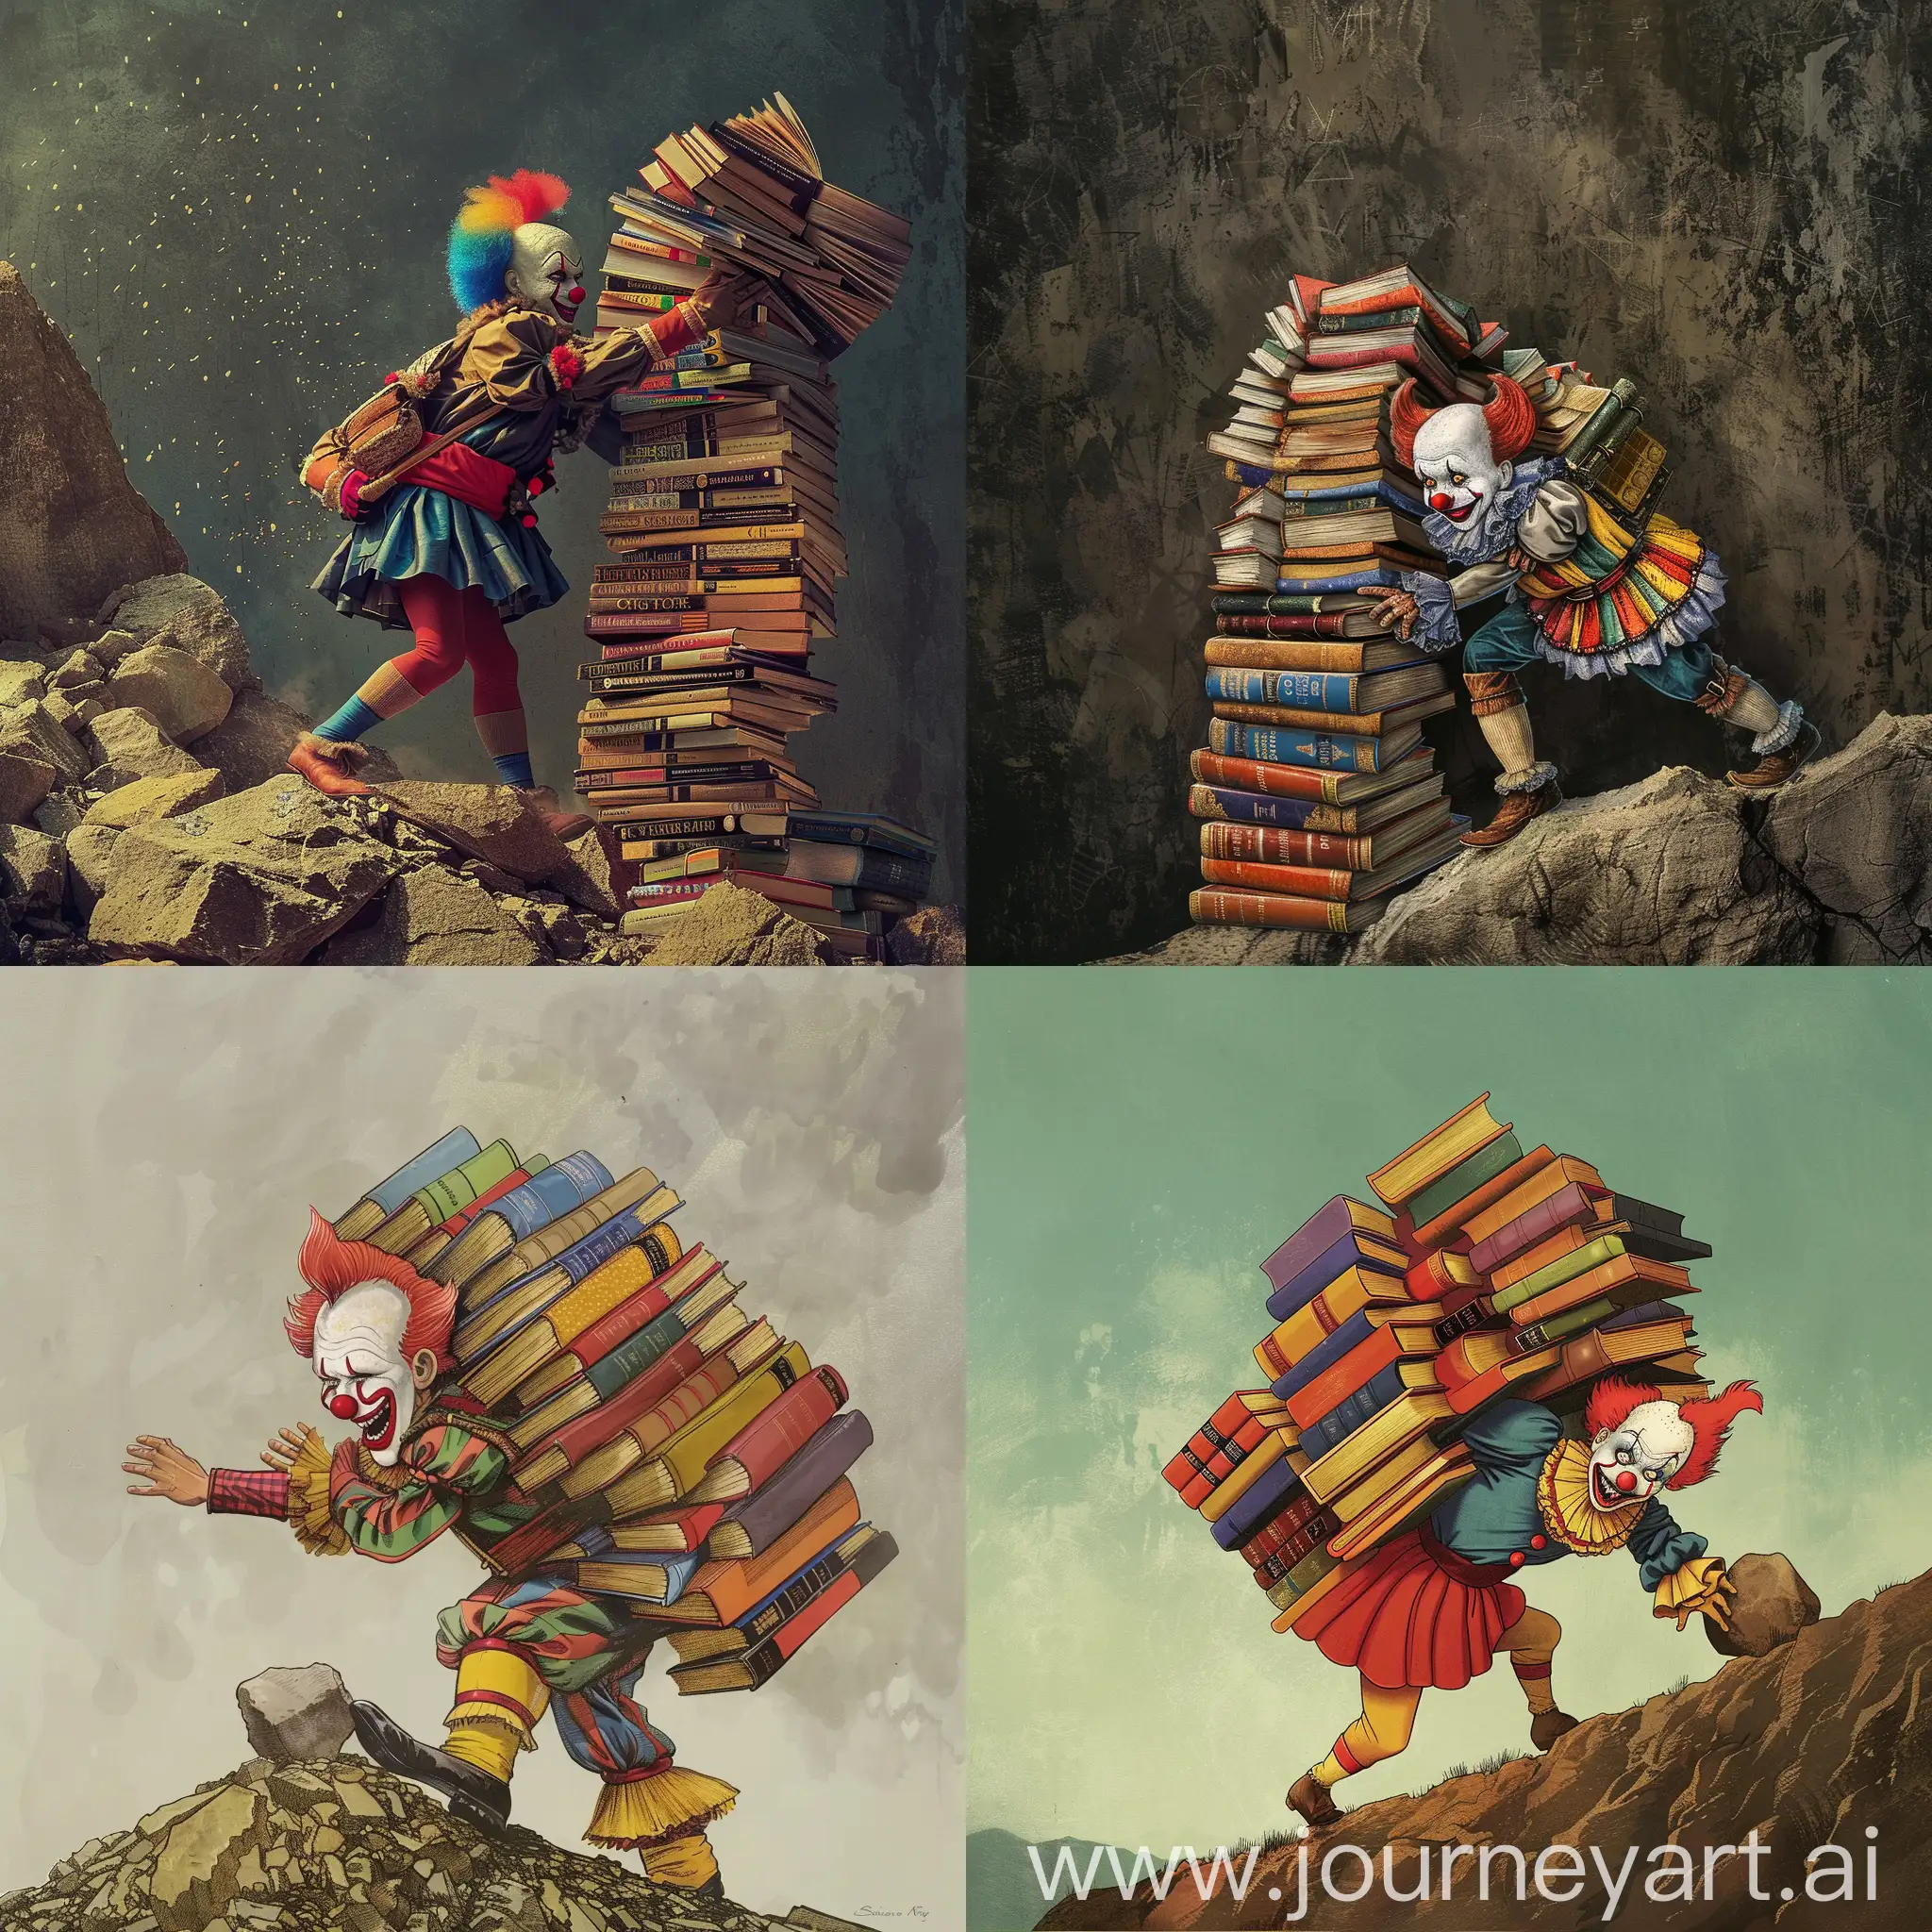 A clown instead of sisyphus pushing heap of books instead of boulder up the hill